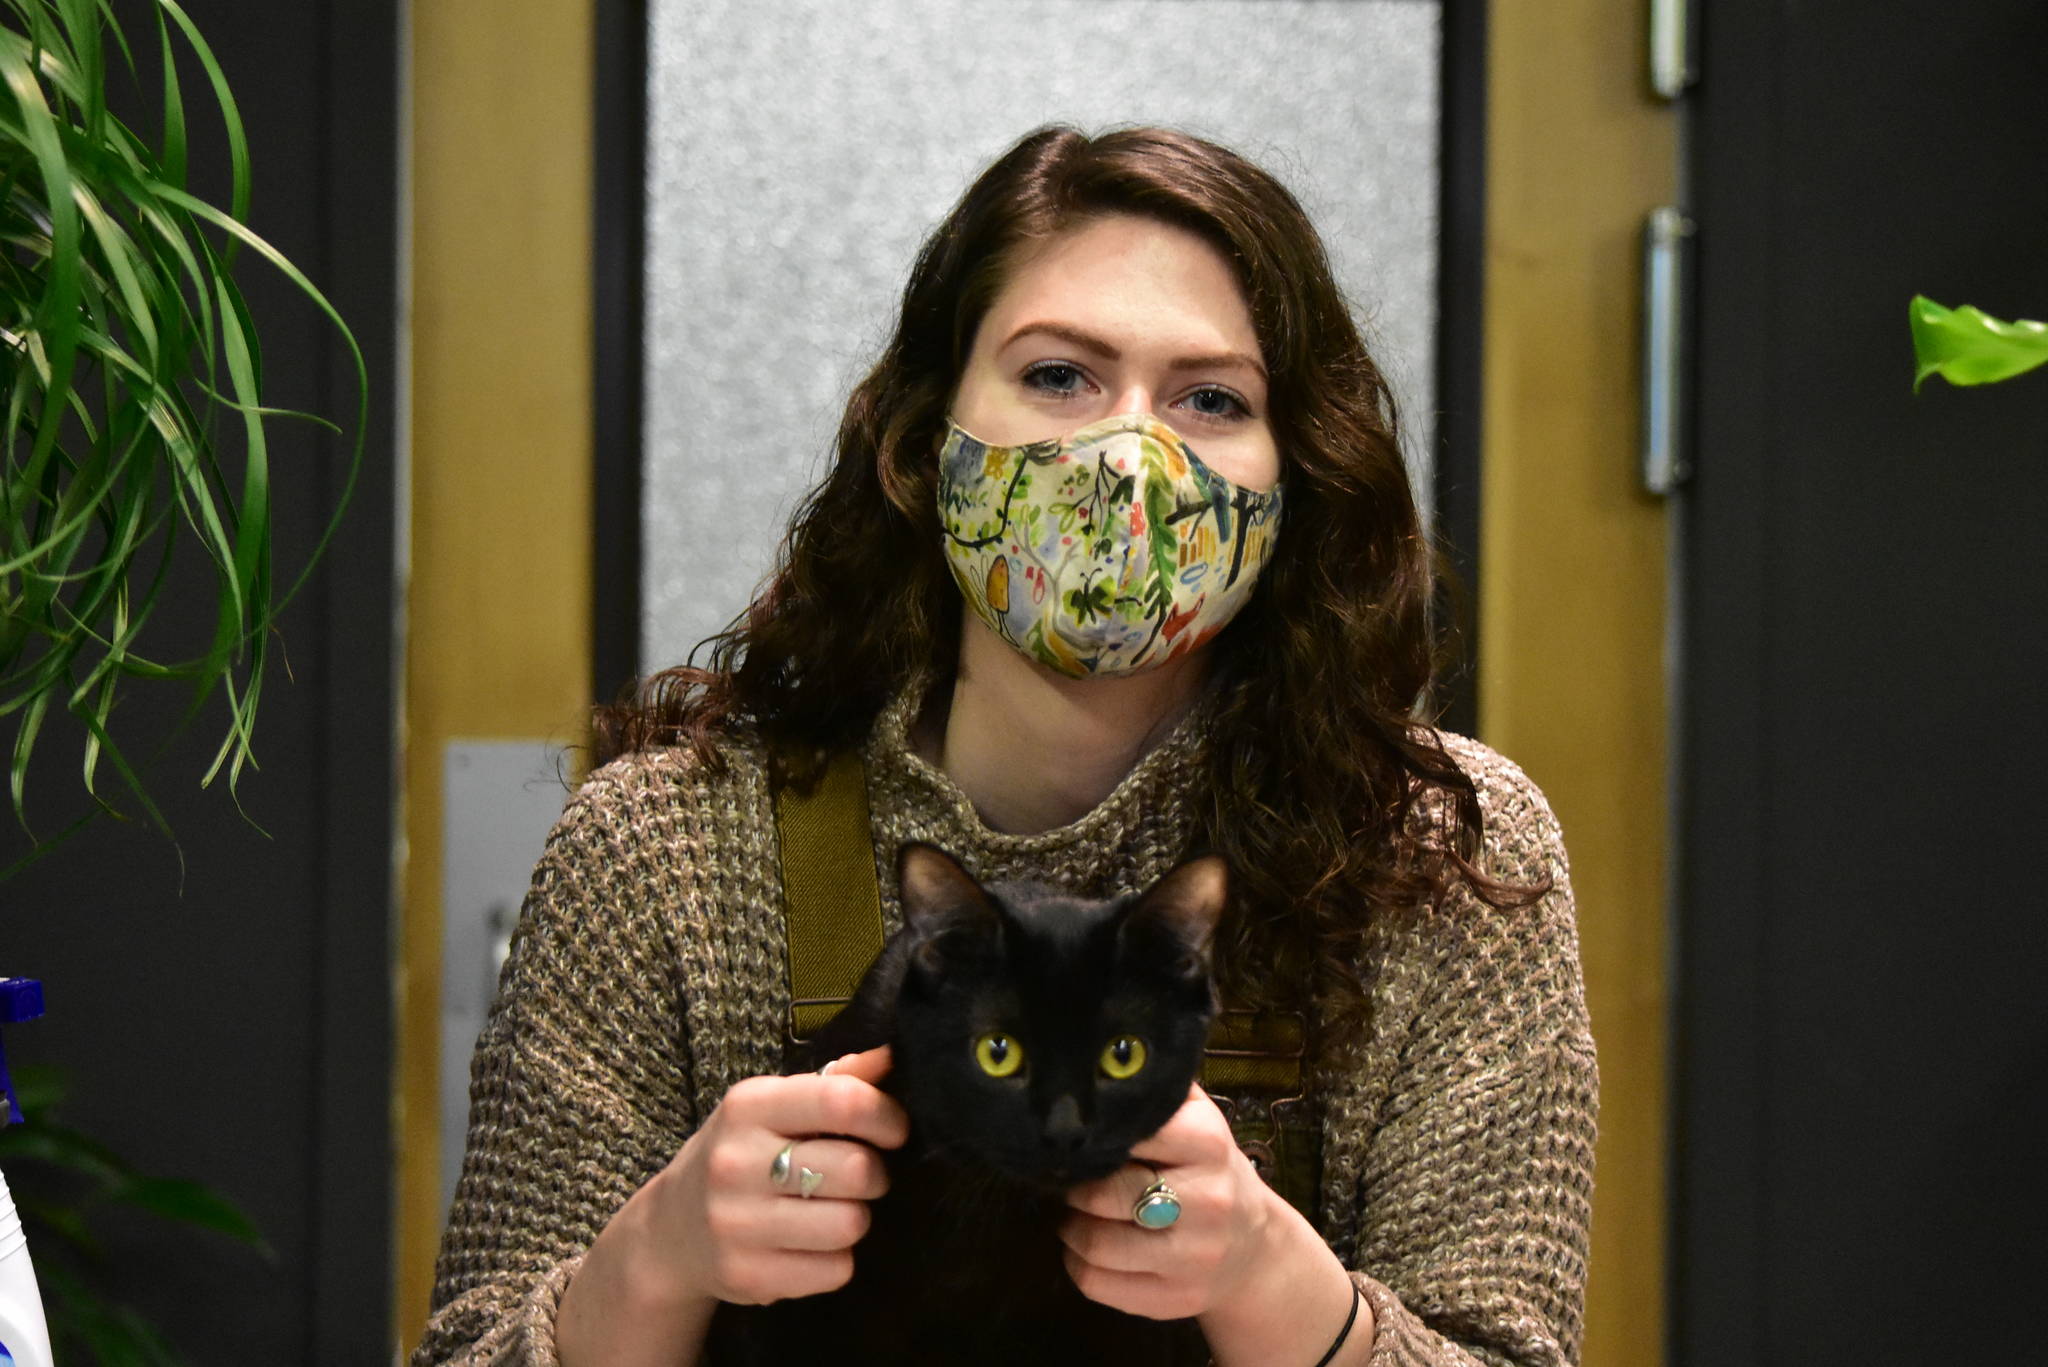 Morgan Johnson, owner of the Plant Studio in downtown Juneau with her cat Edgar on Tuesday, Dec. 15, 2020, said she thinks having people wear masks makes her customers more comfortable. (Peter Segall / Juneau Empire)